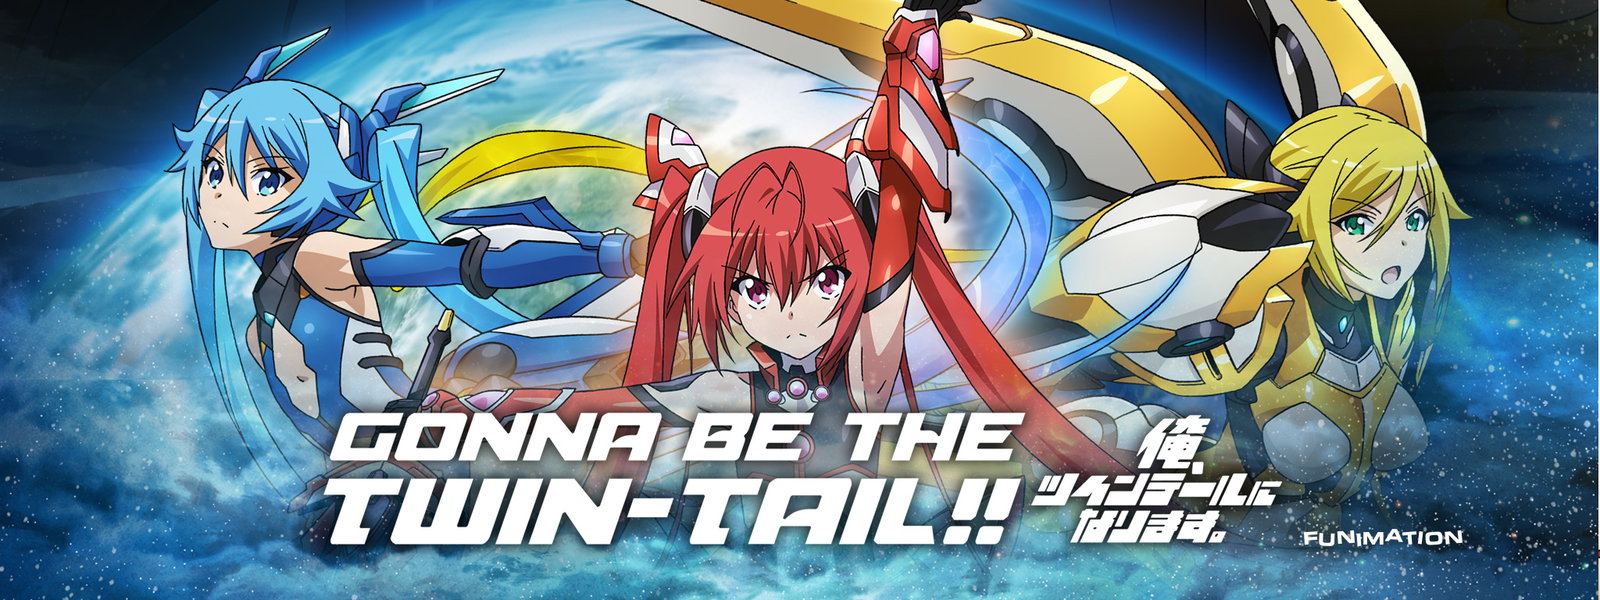 Gonna Be The Twin-Tail!! Backgrounds, Compatible - PC, Mobile, Gadgets| 1600x600 px